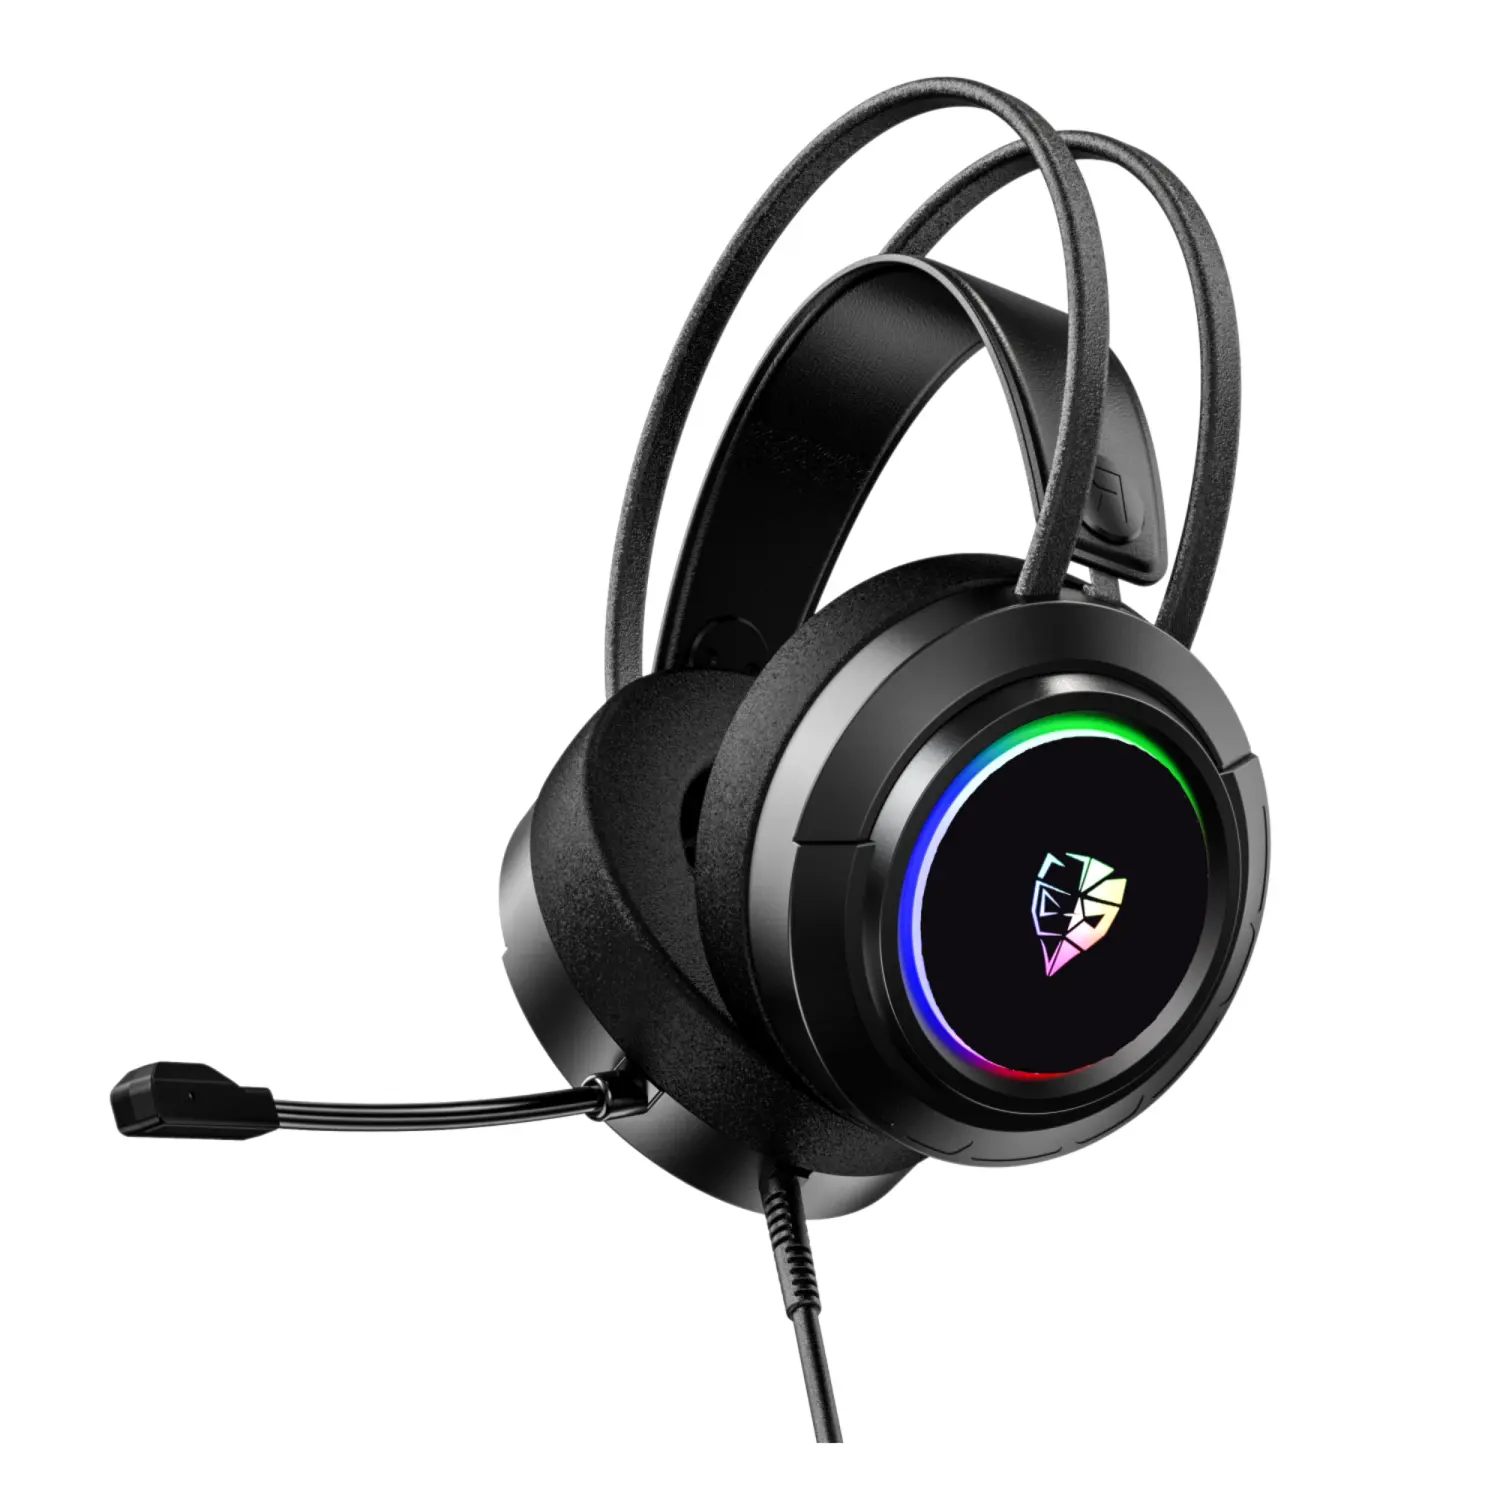 Over Ear Gaming Headset Wired Over Head Headphone with Colorful LED Light USB 3.5mm Jack Earphones Headphones With Mic